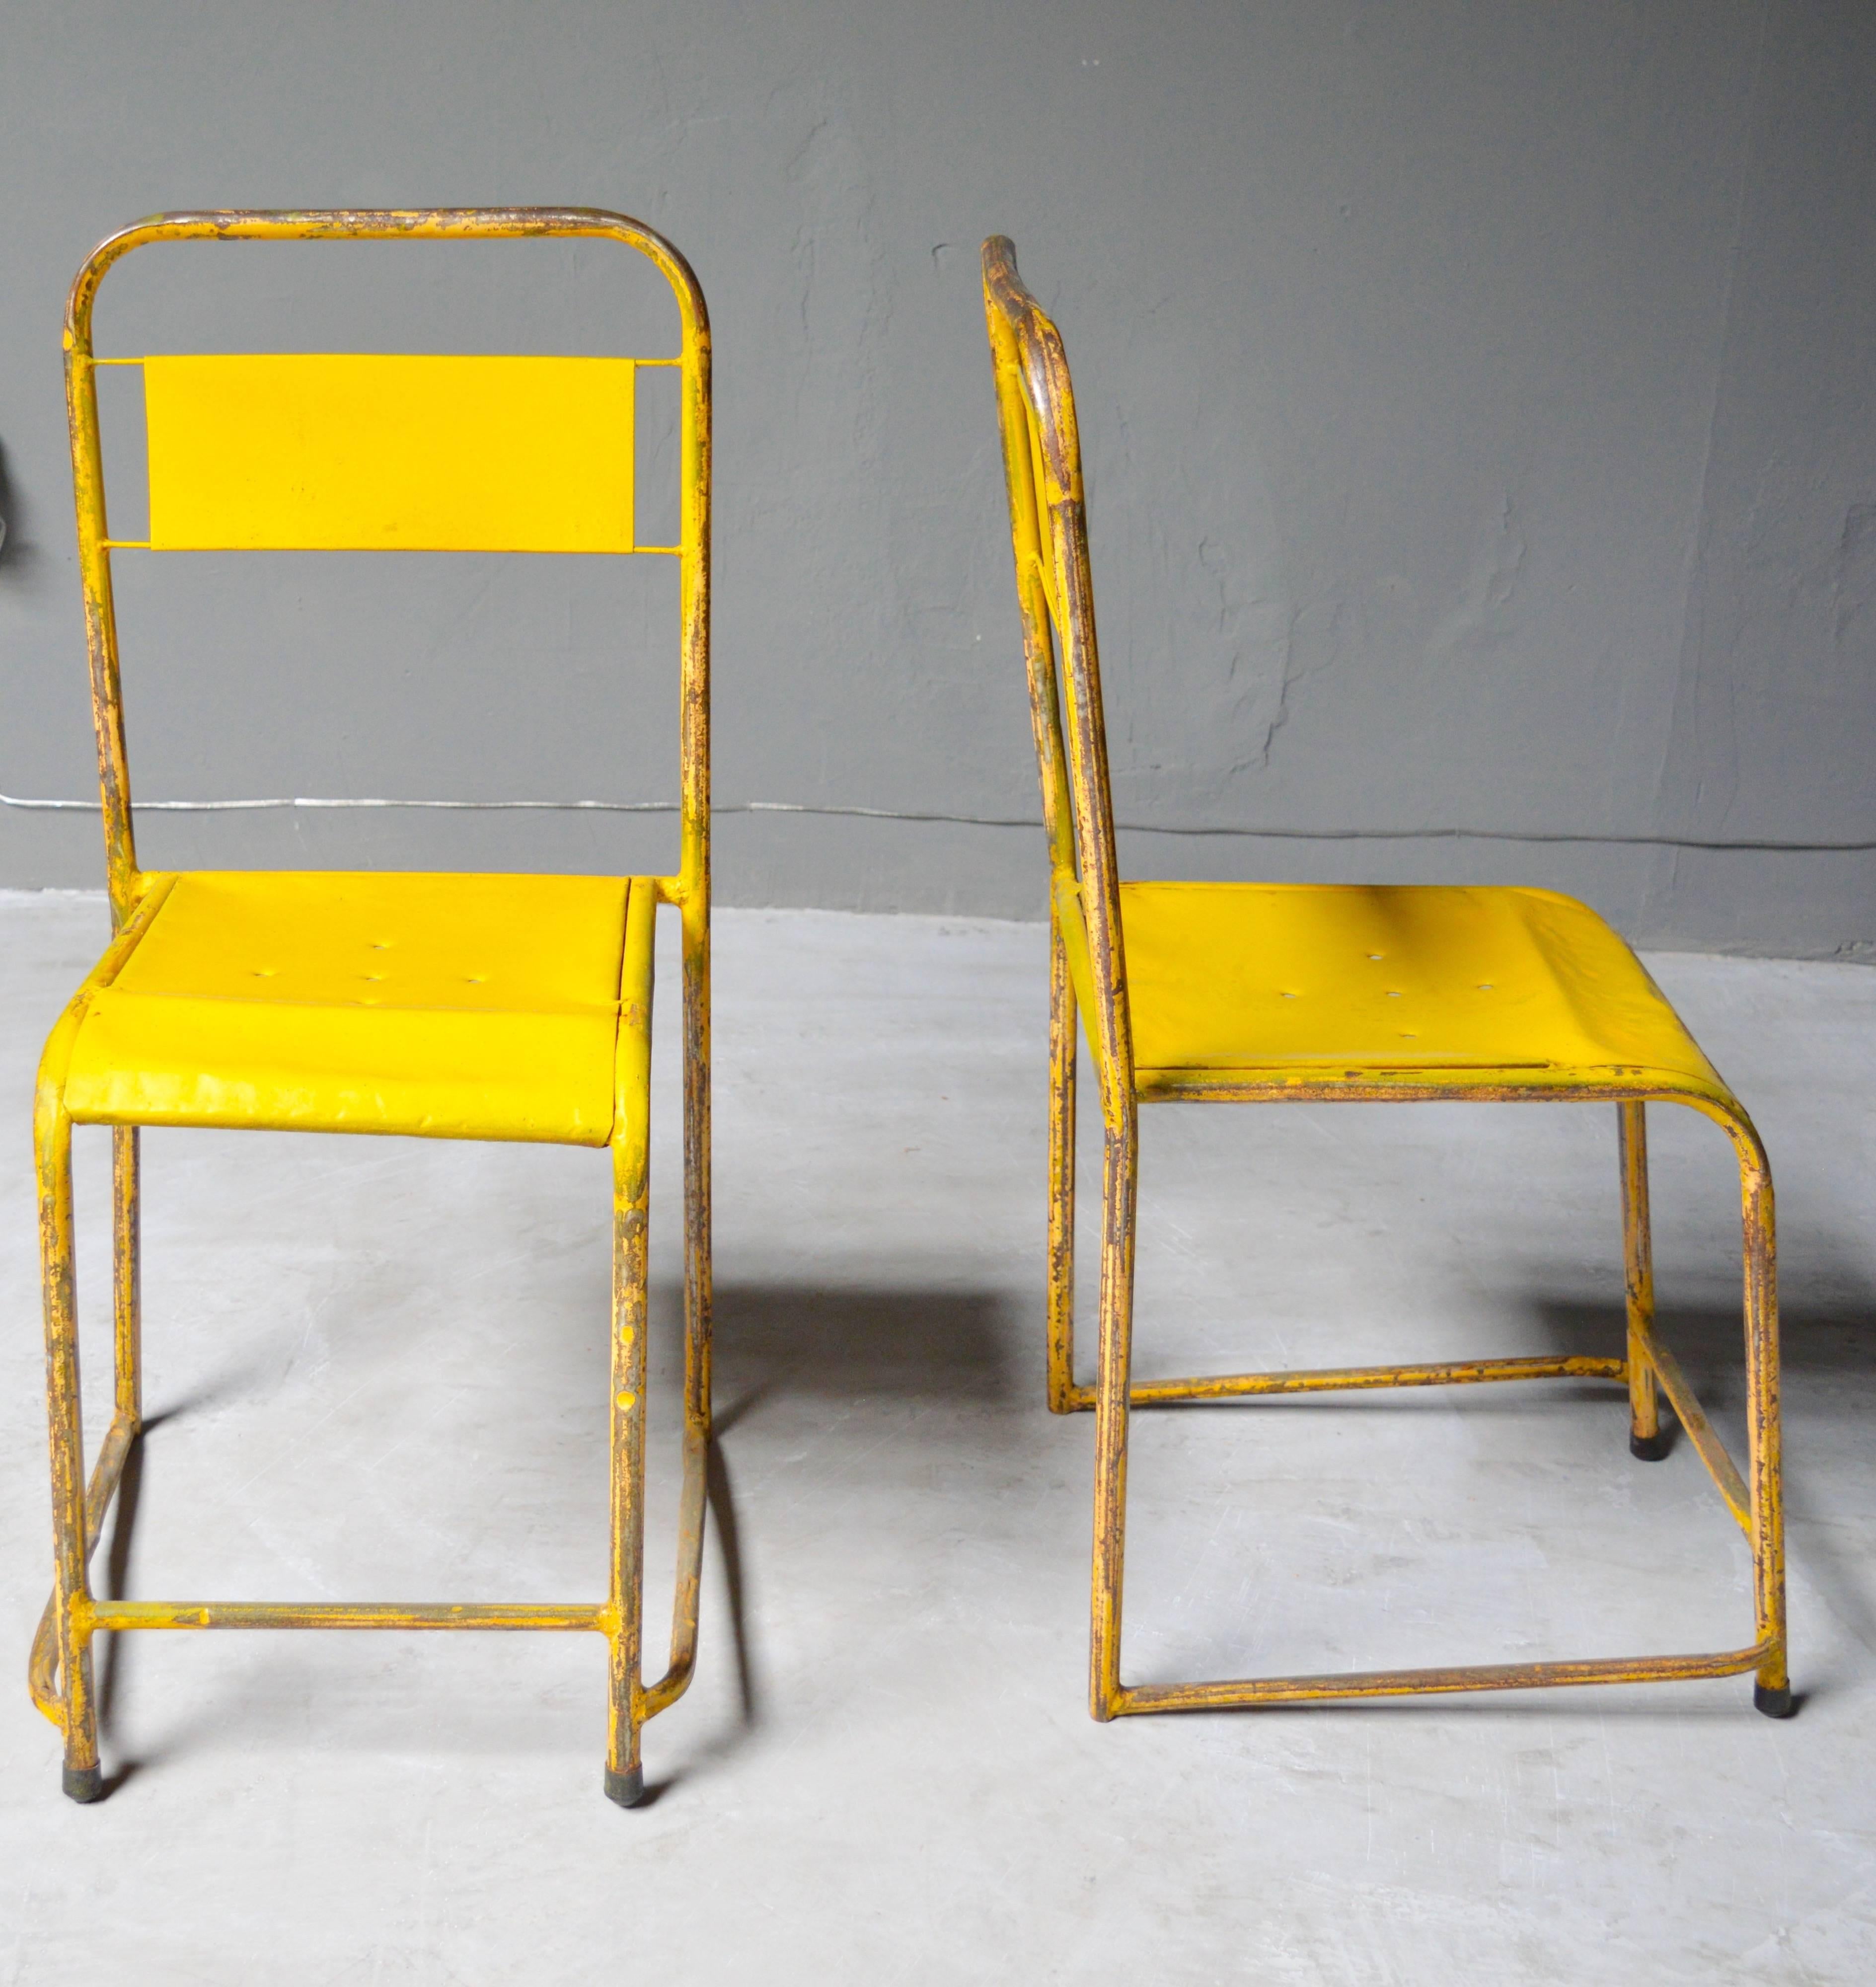 Great pair of French metal school chairs. Great patina and age to metal. Each chair in its own state of vintage condition. Very unusual frame. Surprisingly comfortable. Sold as a pair. 

A set of four turquoise school chairs also available in a